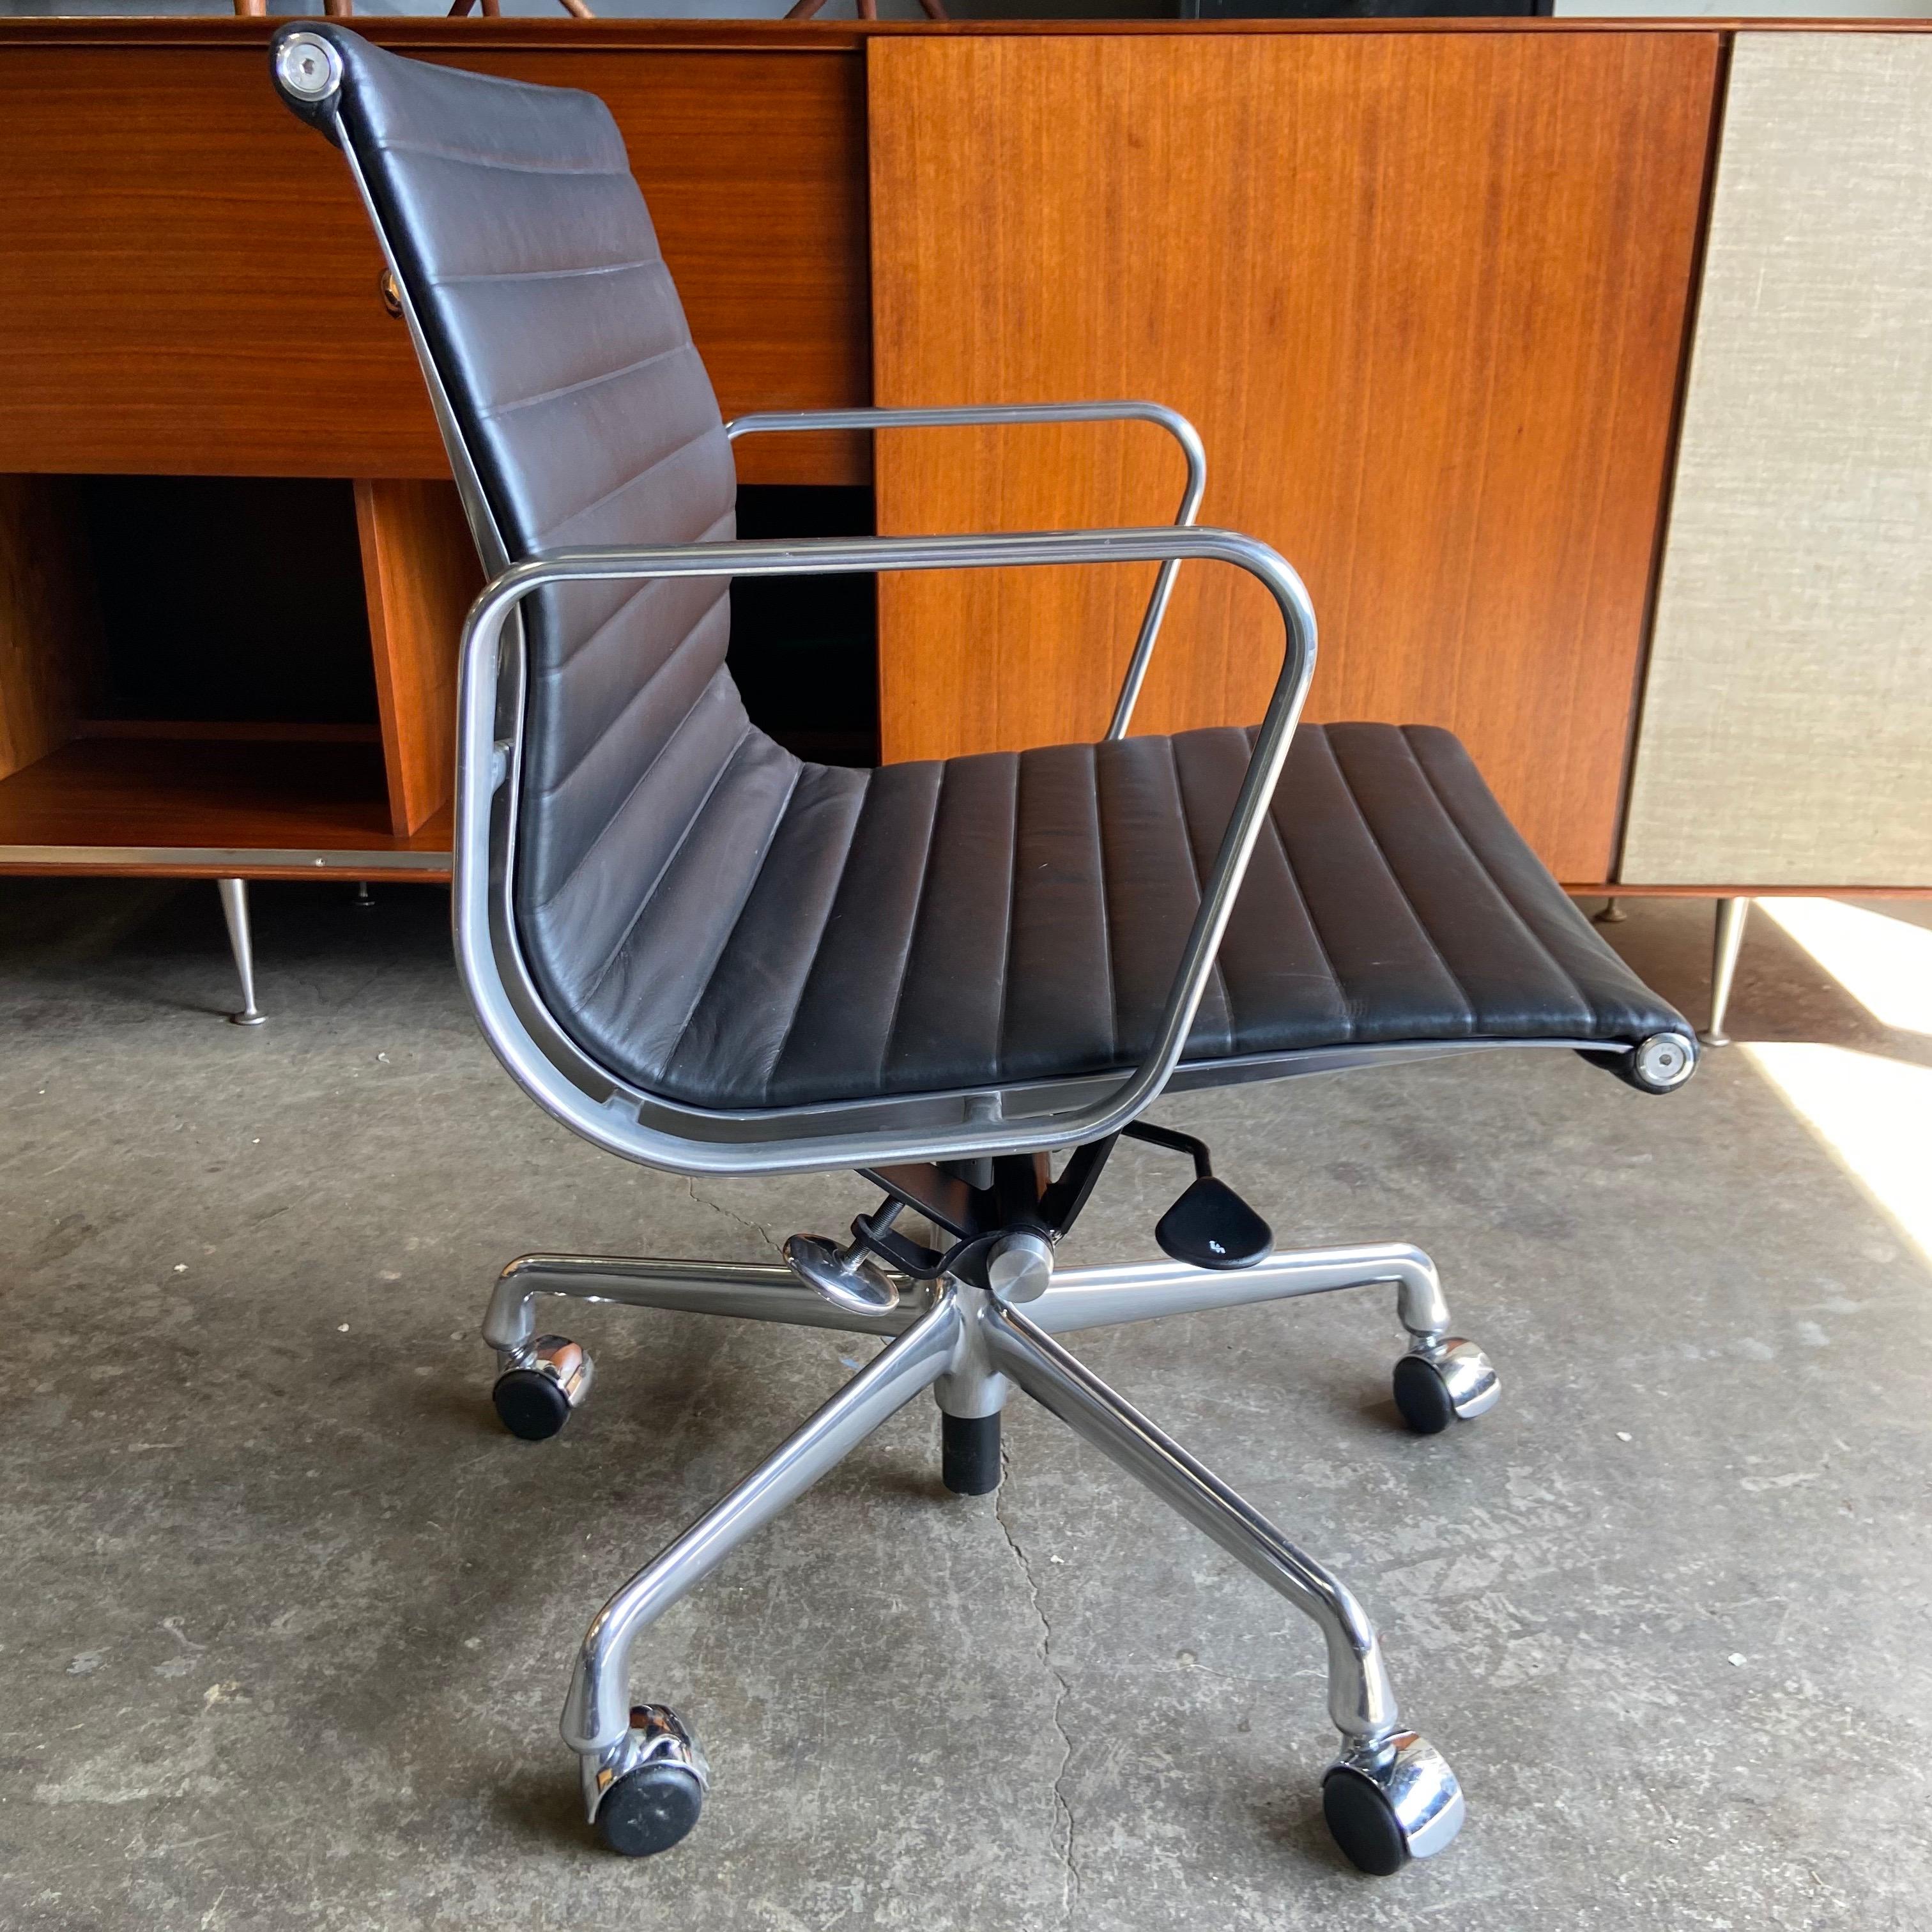 For your consideration we have up to 6 Eames for Herman Miller executive chairs in black leather with low backs. These are from 2011 and barely been used. Full tilt, pneumatic height adjustment, and swivel with carpet / hardwood casters.

These